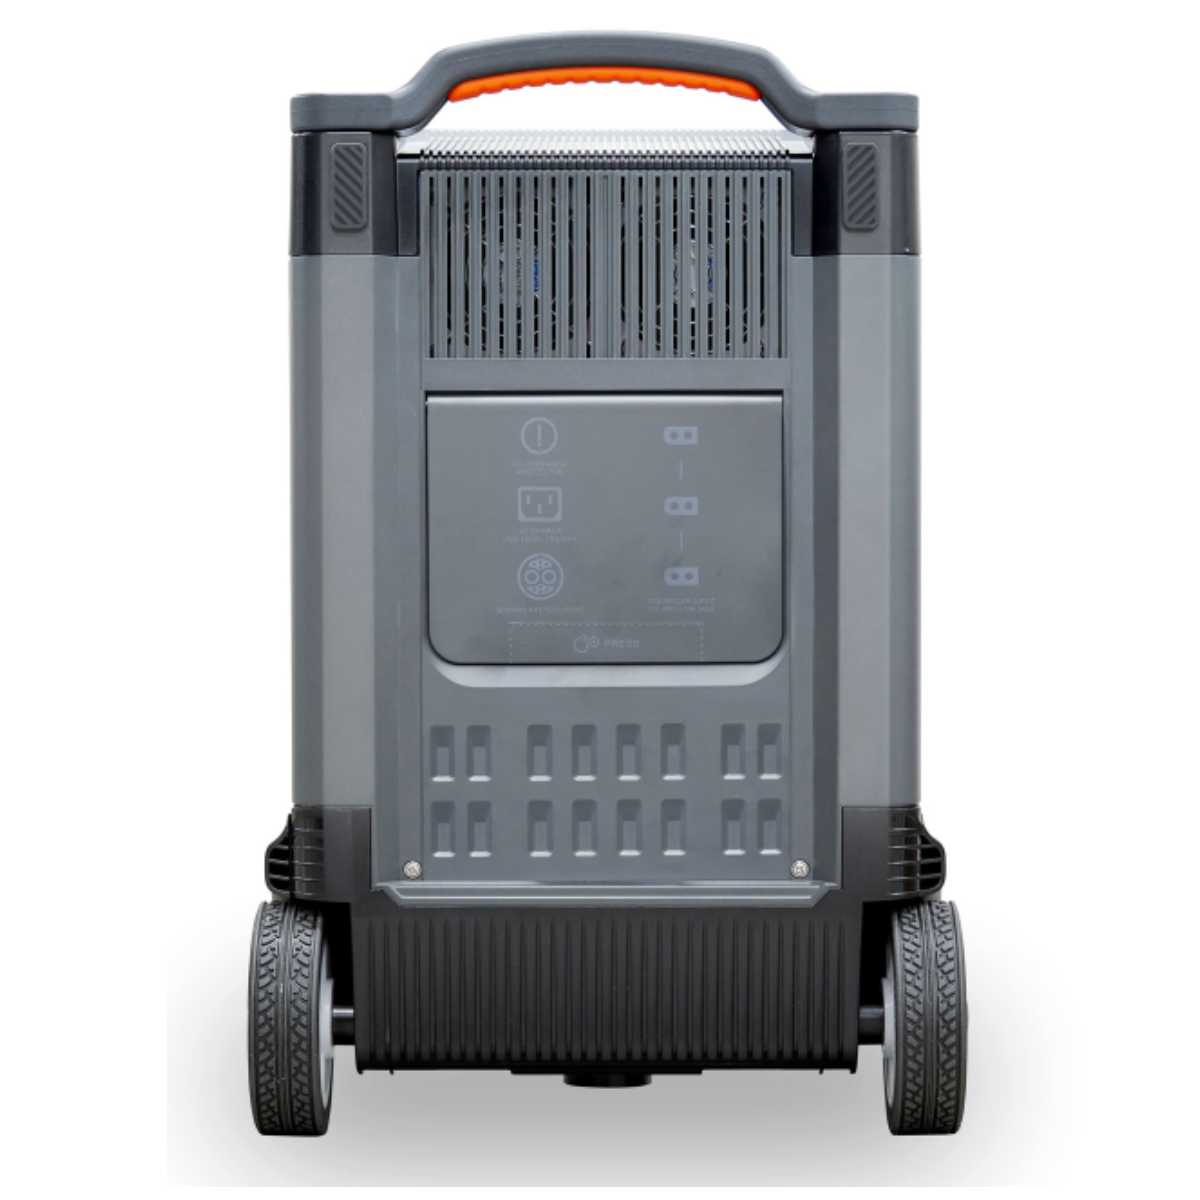 ALLPOWERS R4000 Portable Power Station 3600W 3456Wh